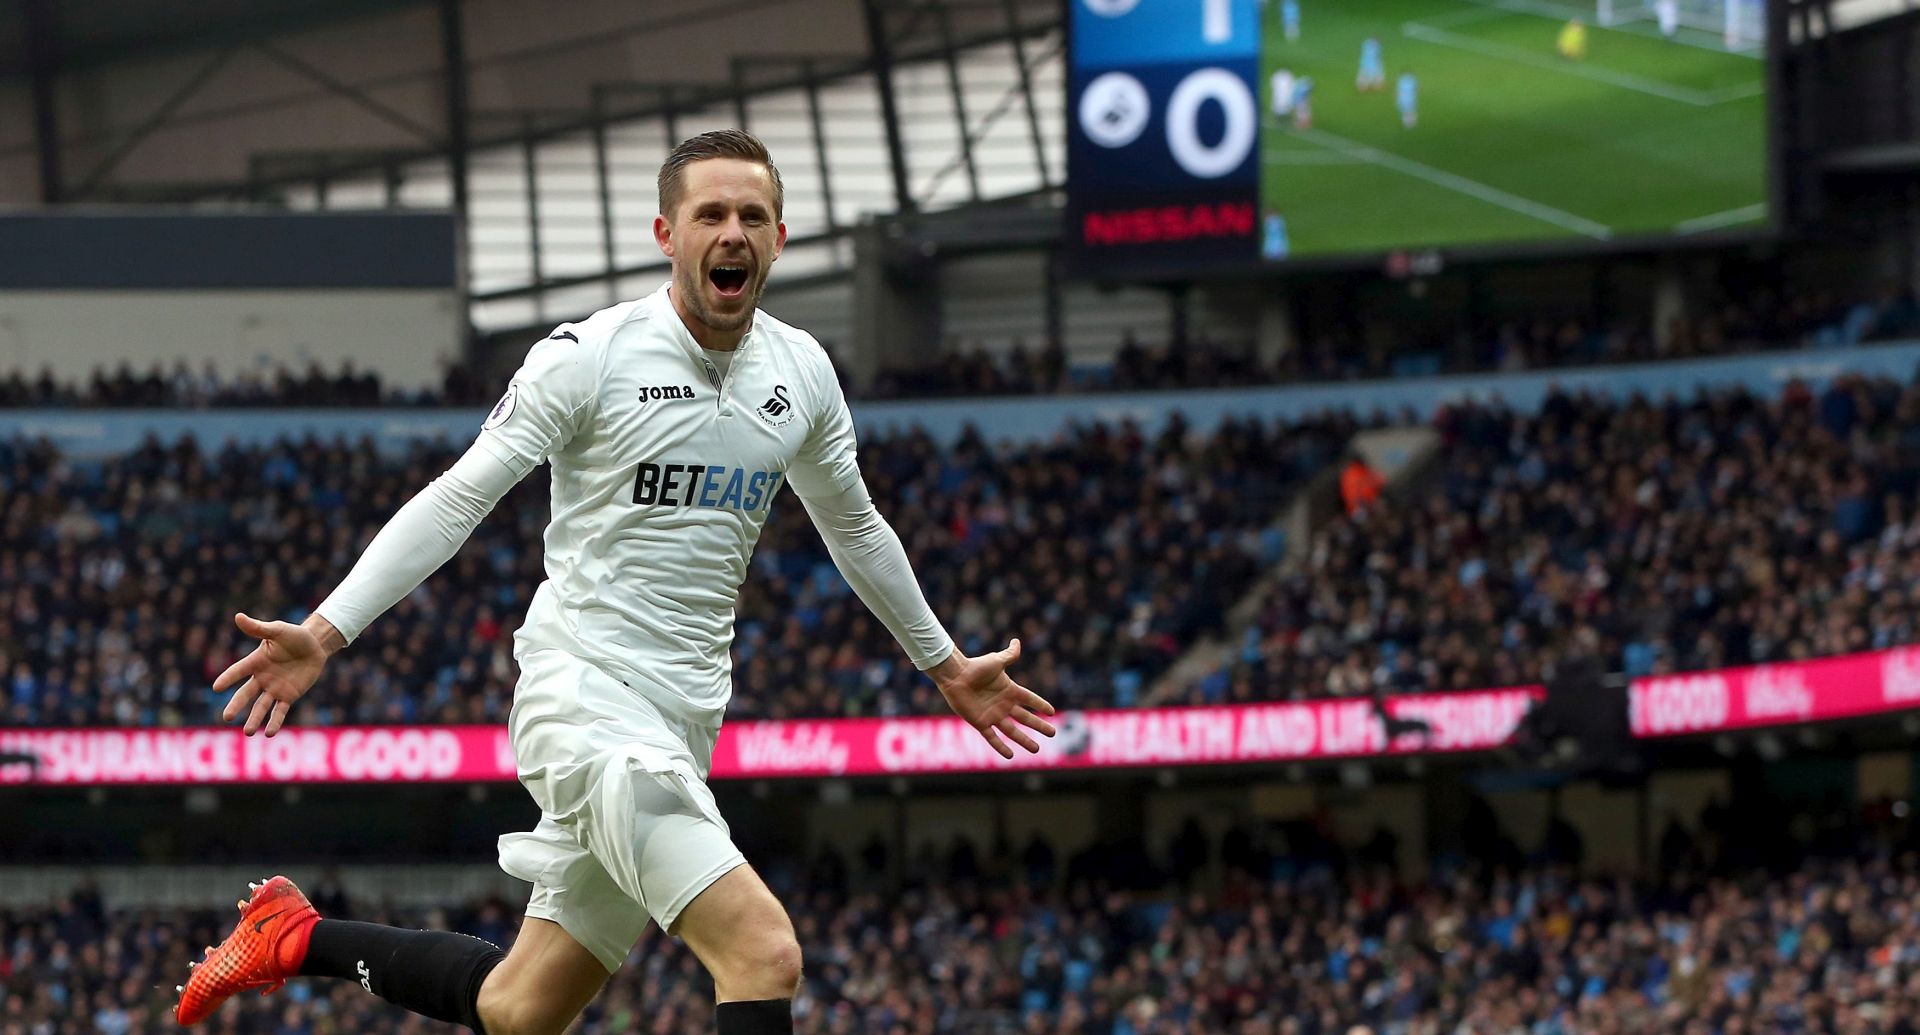 epa05772951 Swansea City's Gylfi Sigurdsson celebrates after scoring the 1-1 goal during the English Premier League soccer match between Manchester City and Swansea City at the Etihad Stadium in Manchester, Britain, 05 February 2017.  EPA/NIGEL RODDIS EDITORIAL USE ONLY. No use with unauthorized audio, video, data, fixture lists, club/league logos or 'live' services. Online in-match use limited to 75 images, no video emulation. No use in betting, games or single club/league/player publications.